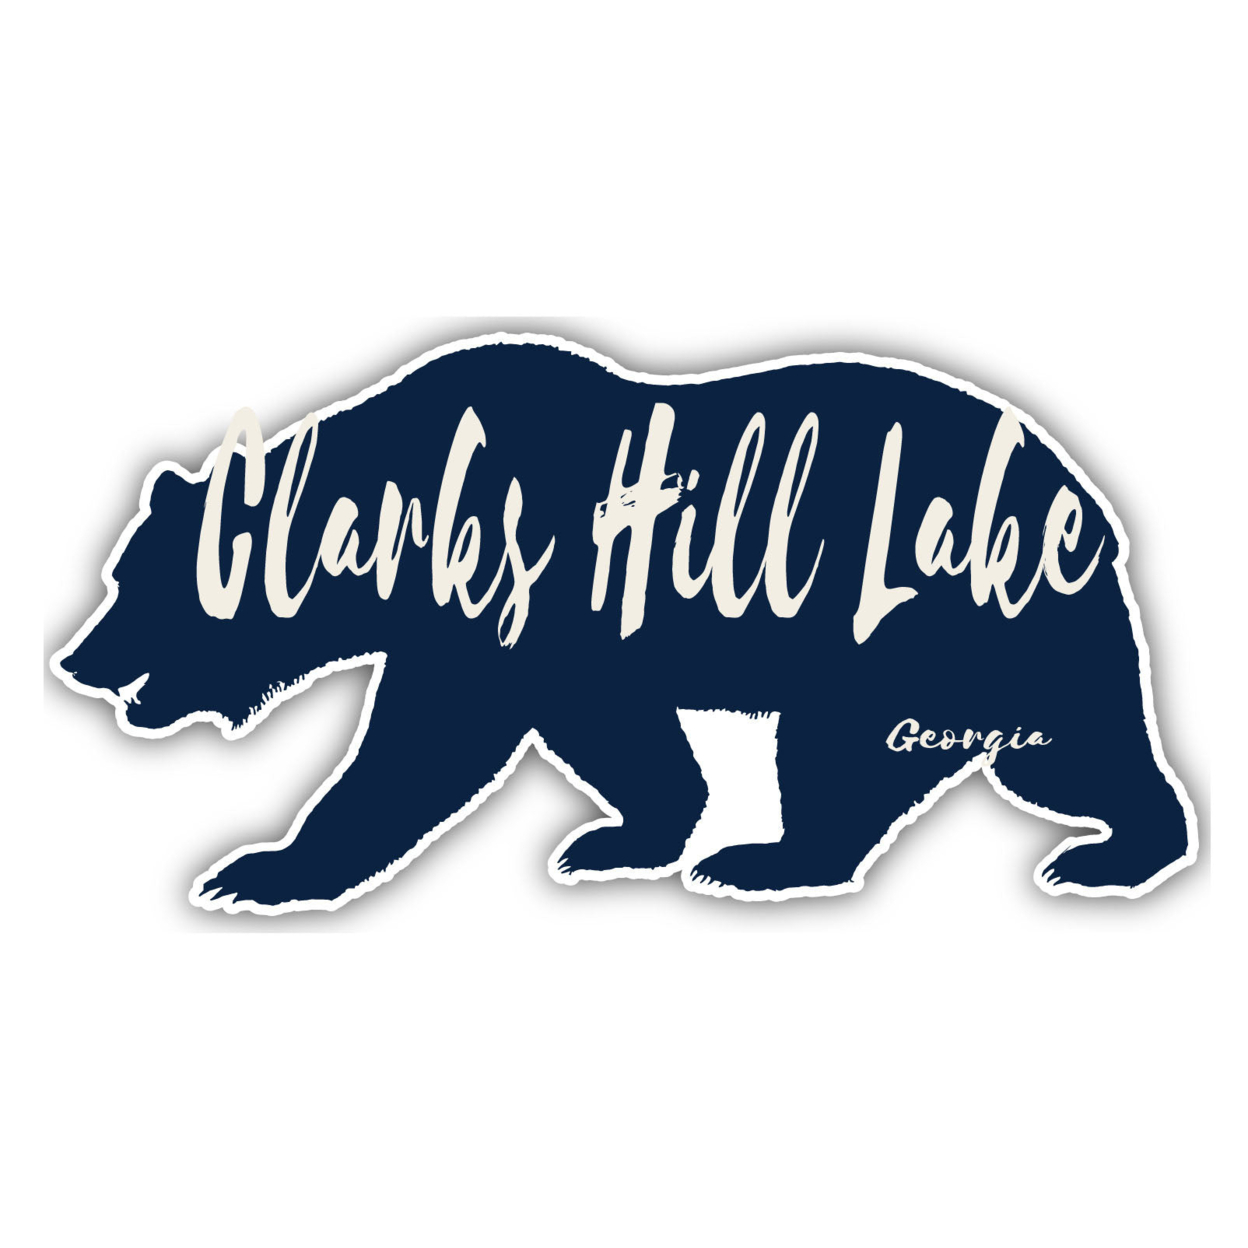 Clarks Hill Lake Georgia Souvenir Decorative Stickers (Choose Theme And Size) - 4-Pack, 4-Inch, Bear